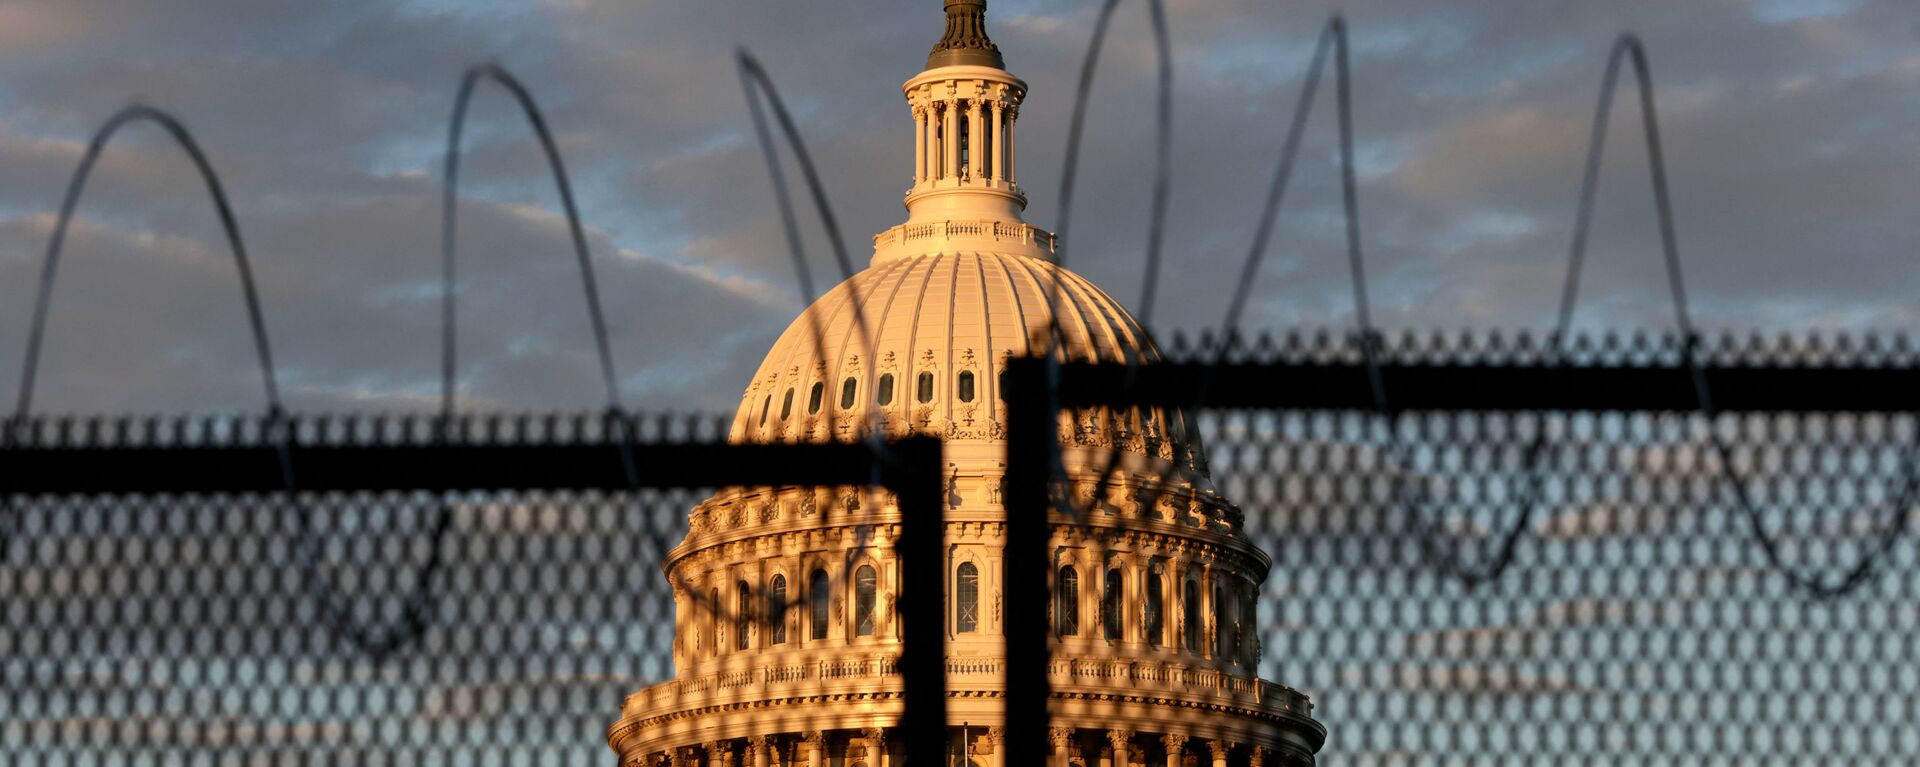  The U.S. Capitol is seen behind a fence with razor wire during sunrise on January 16, 2021 in Washington, DC. After last week's riots at the U.S. Capitol Building, the FBI has warned of additional threats in the nation's capital and in all 50 states. According to reports, as many as 25,000 National Guard soldiers will be guarding the city as preparations are made for the inauguration of Joe Biden as the 46th U.S. President. - Sputnik International, 1920, 07.02.2023